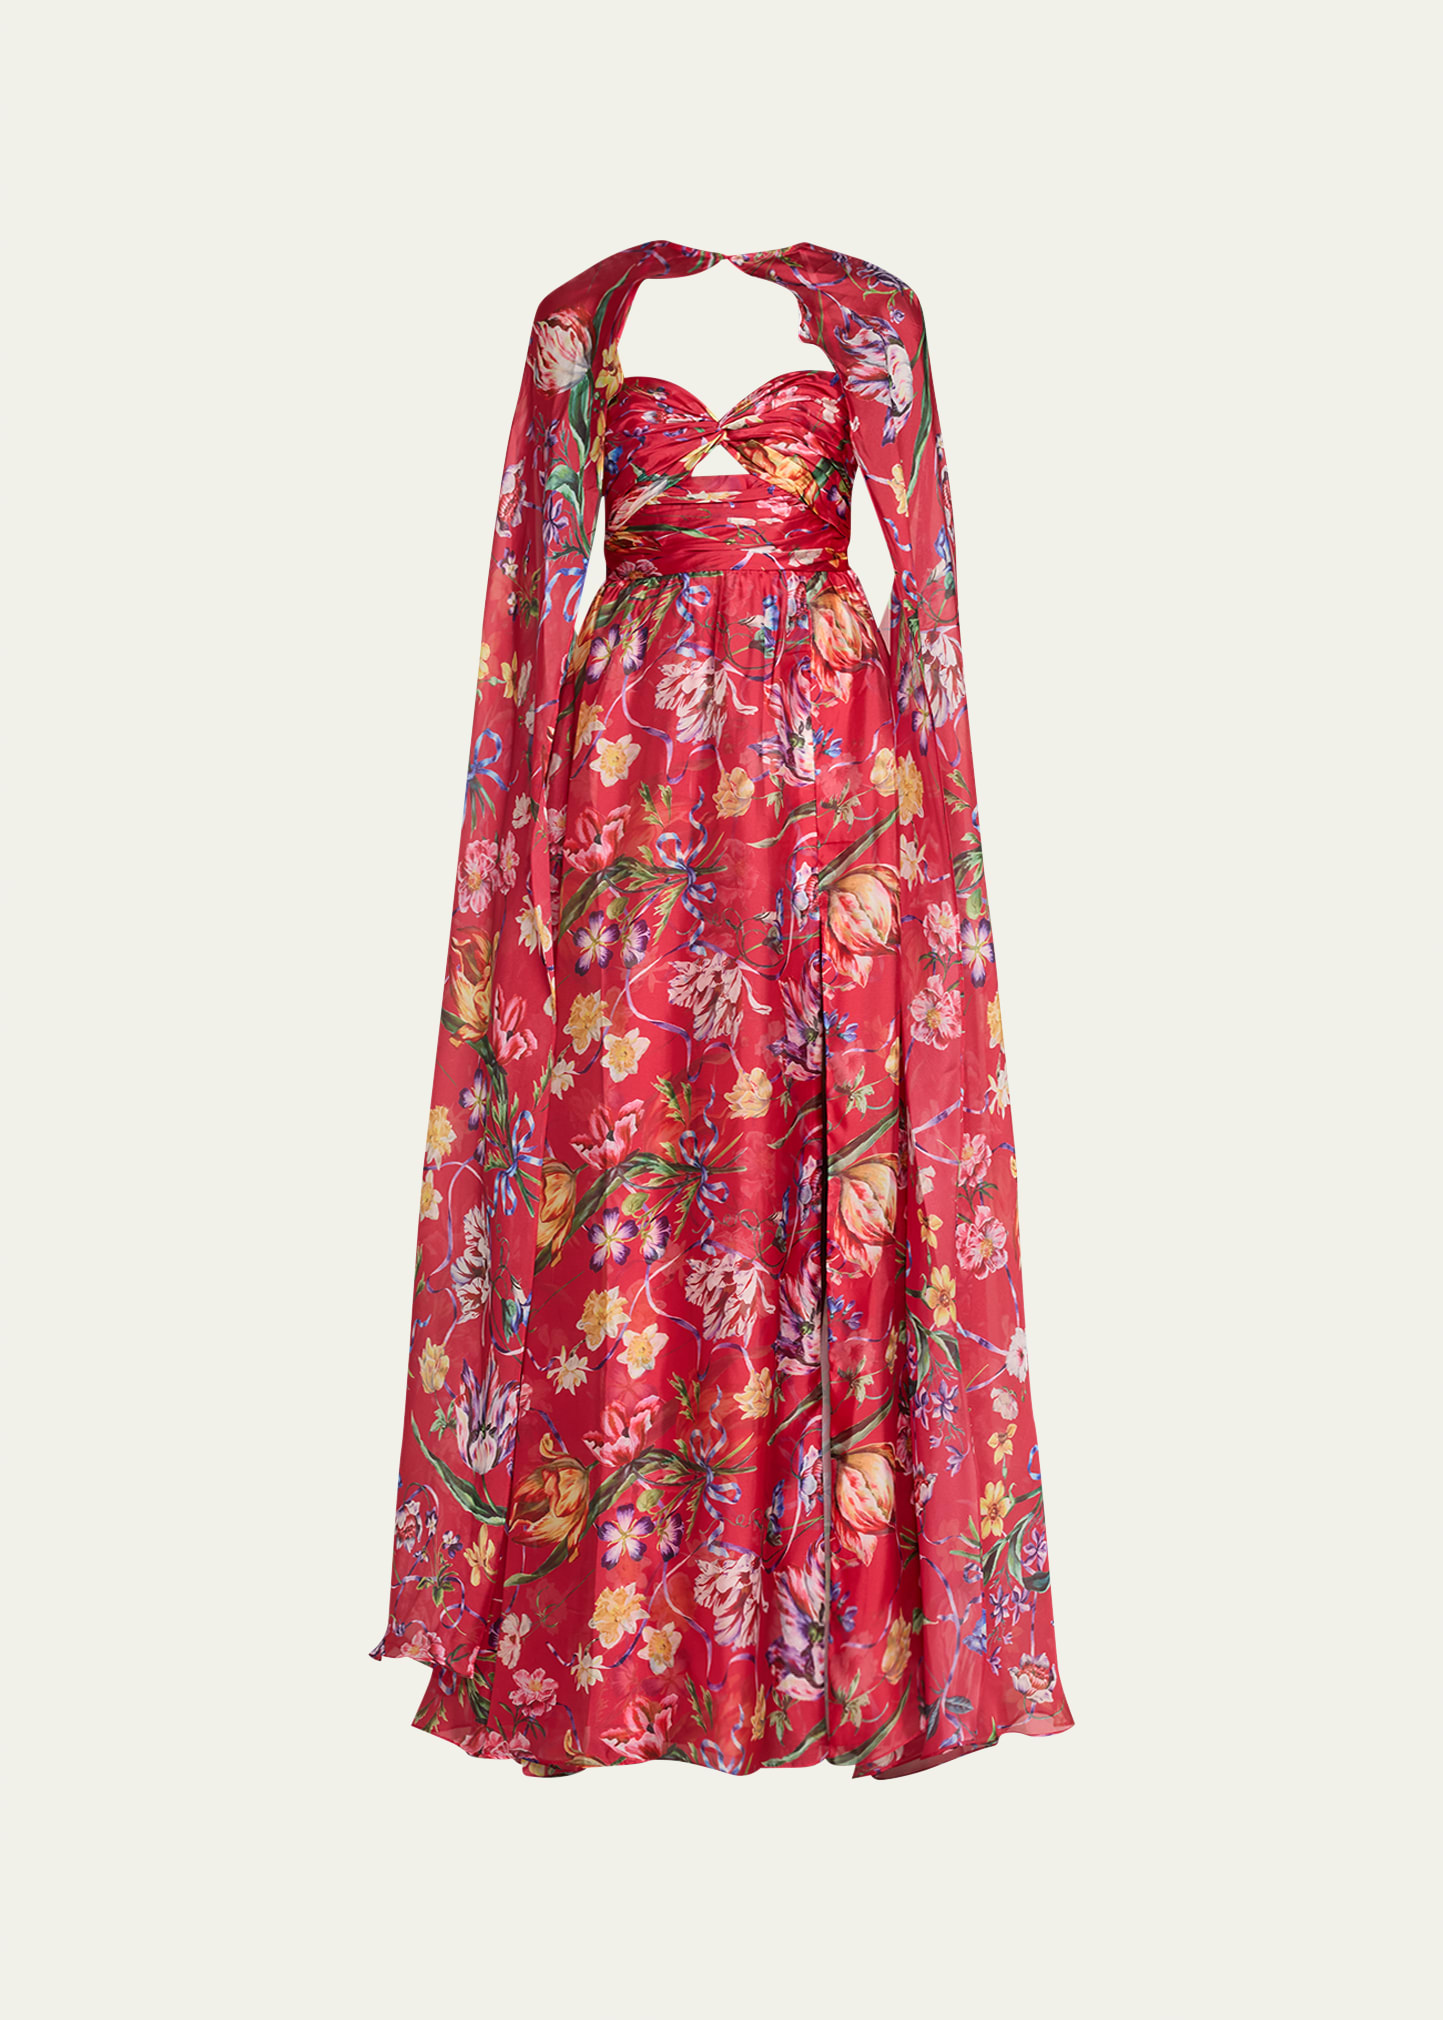 Cutout Floral-Print Sweetheart Cape Gown